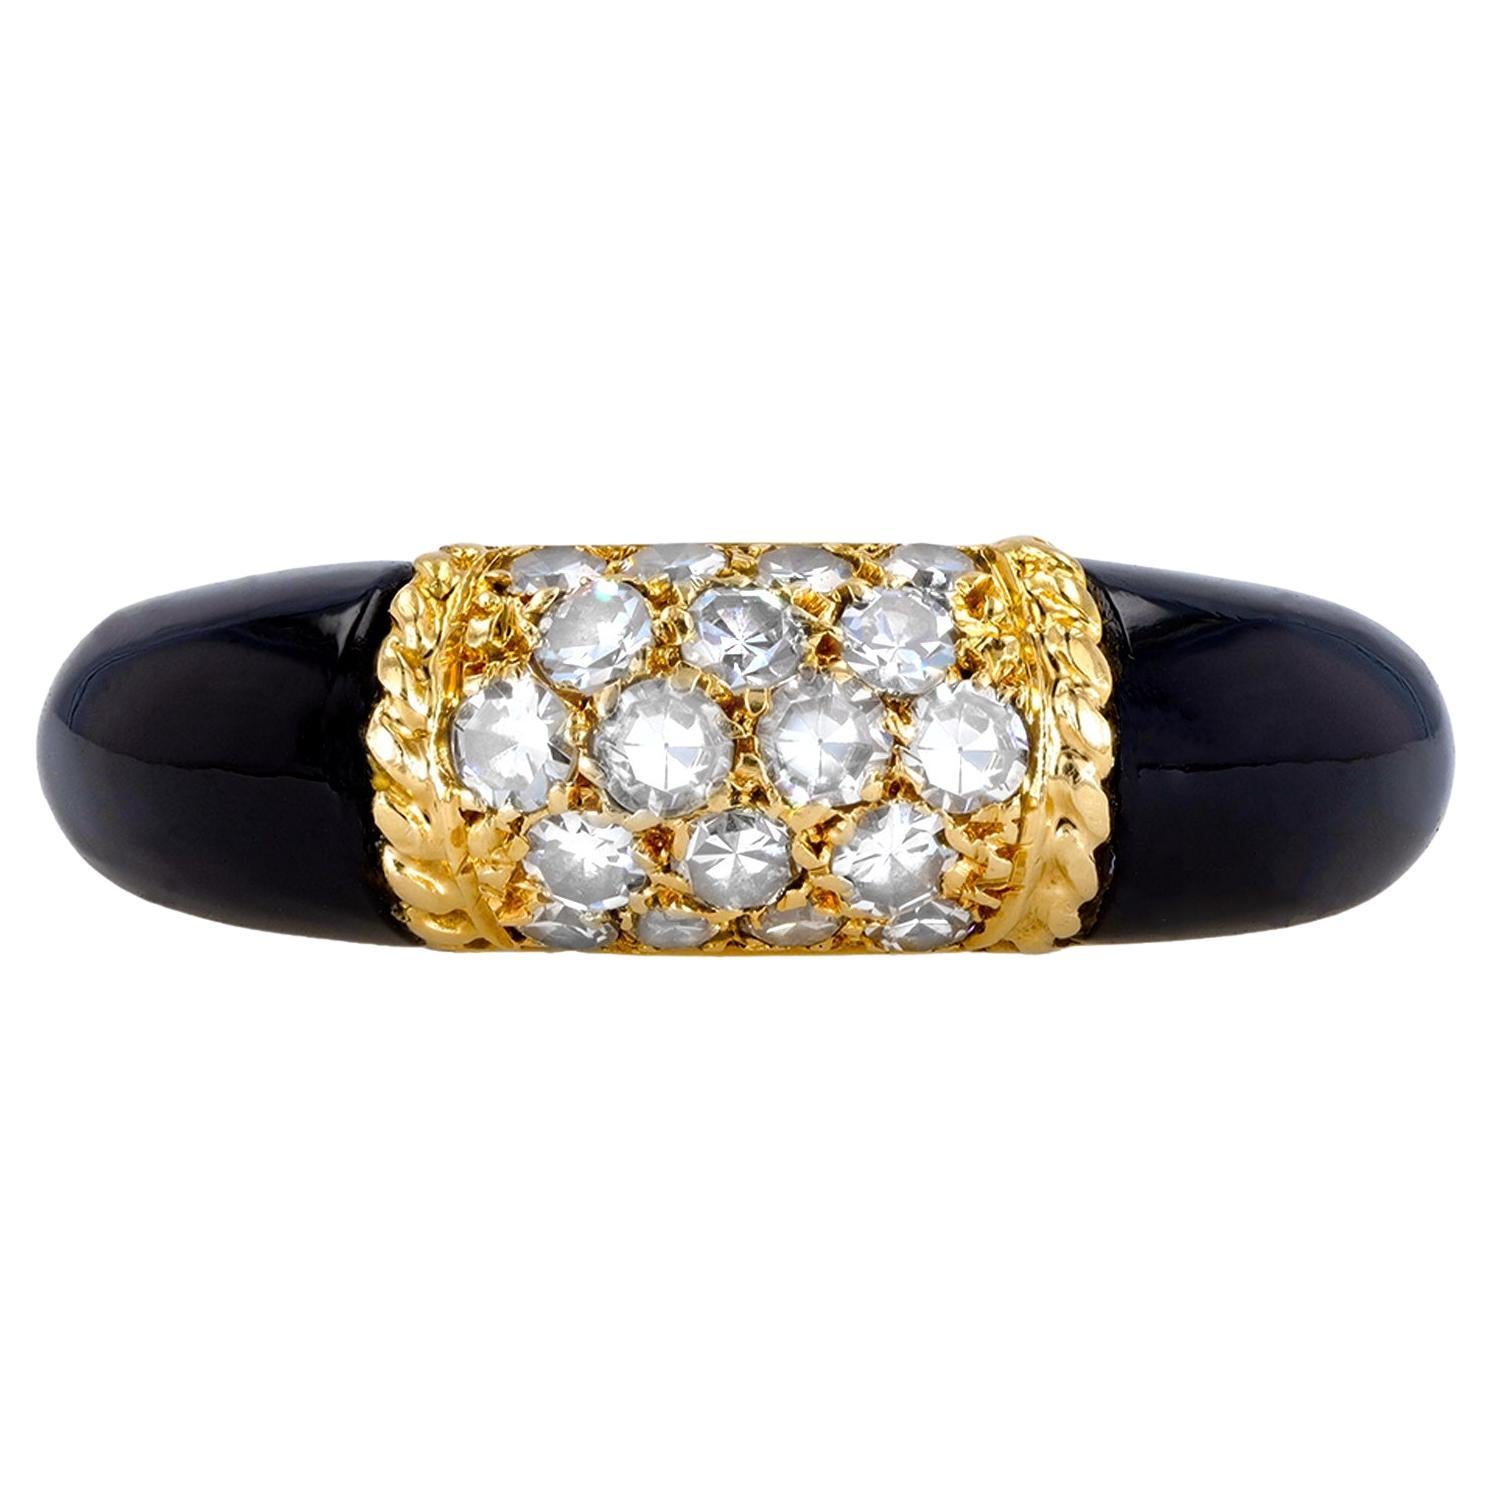 Van Cleef & Arpels Onyx and Diamond 'Philippine' Ring, French, circa 1960 For Sale